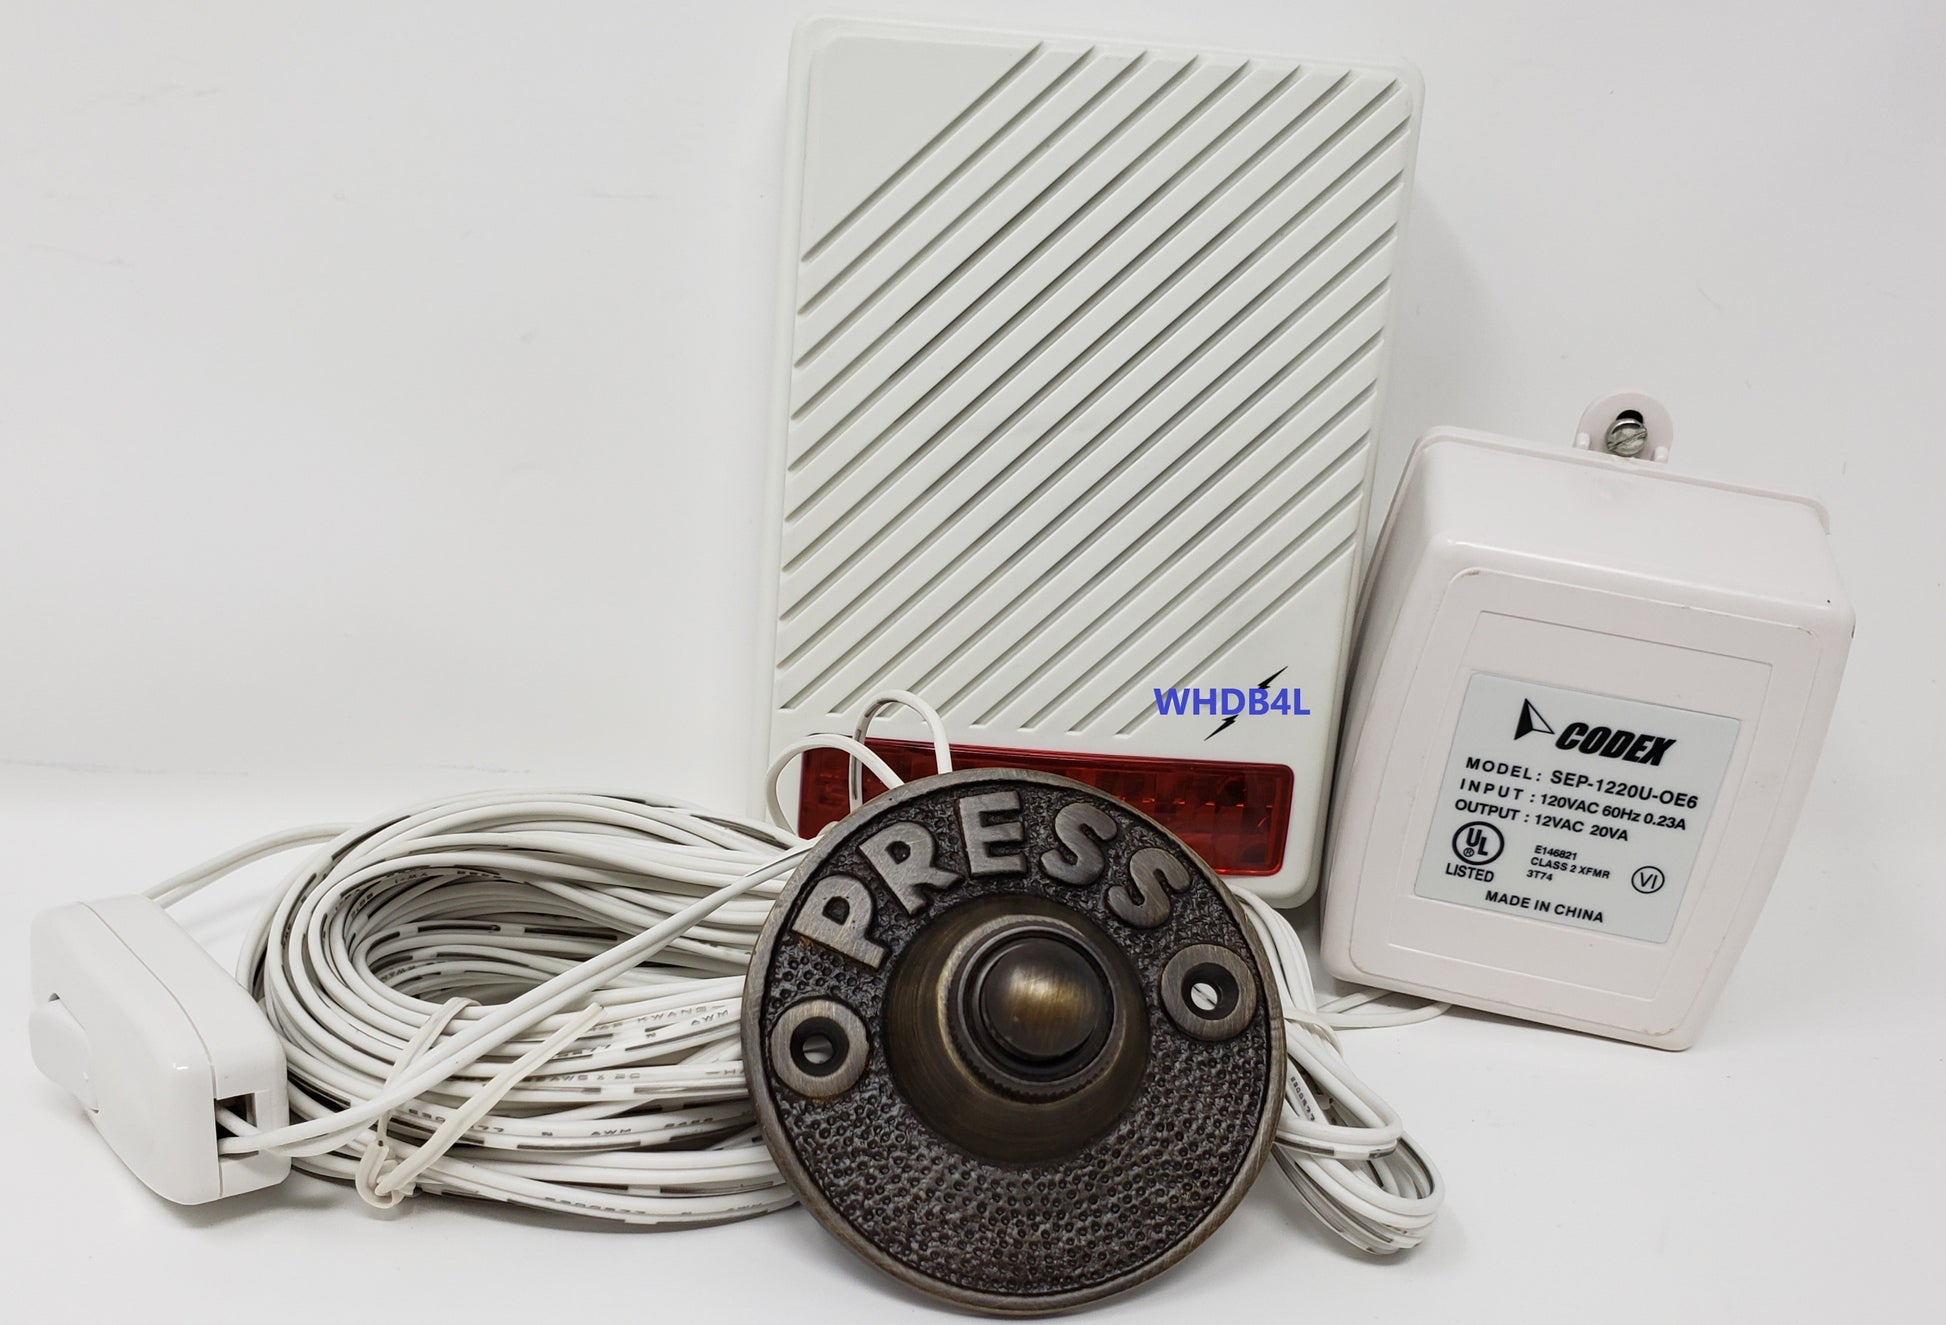 Warehouse Wired  Doorbell ( WHDB4L ) - Reliable Chimes